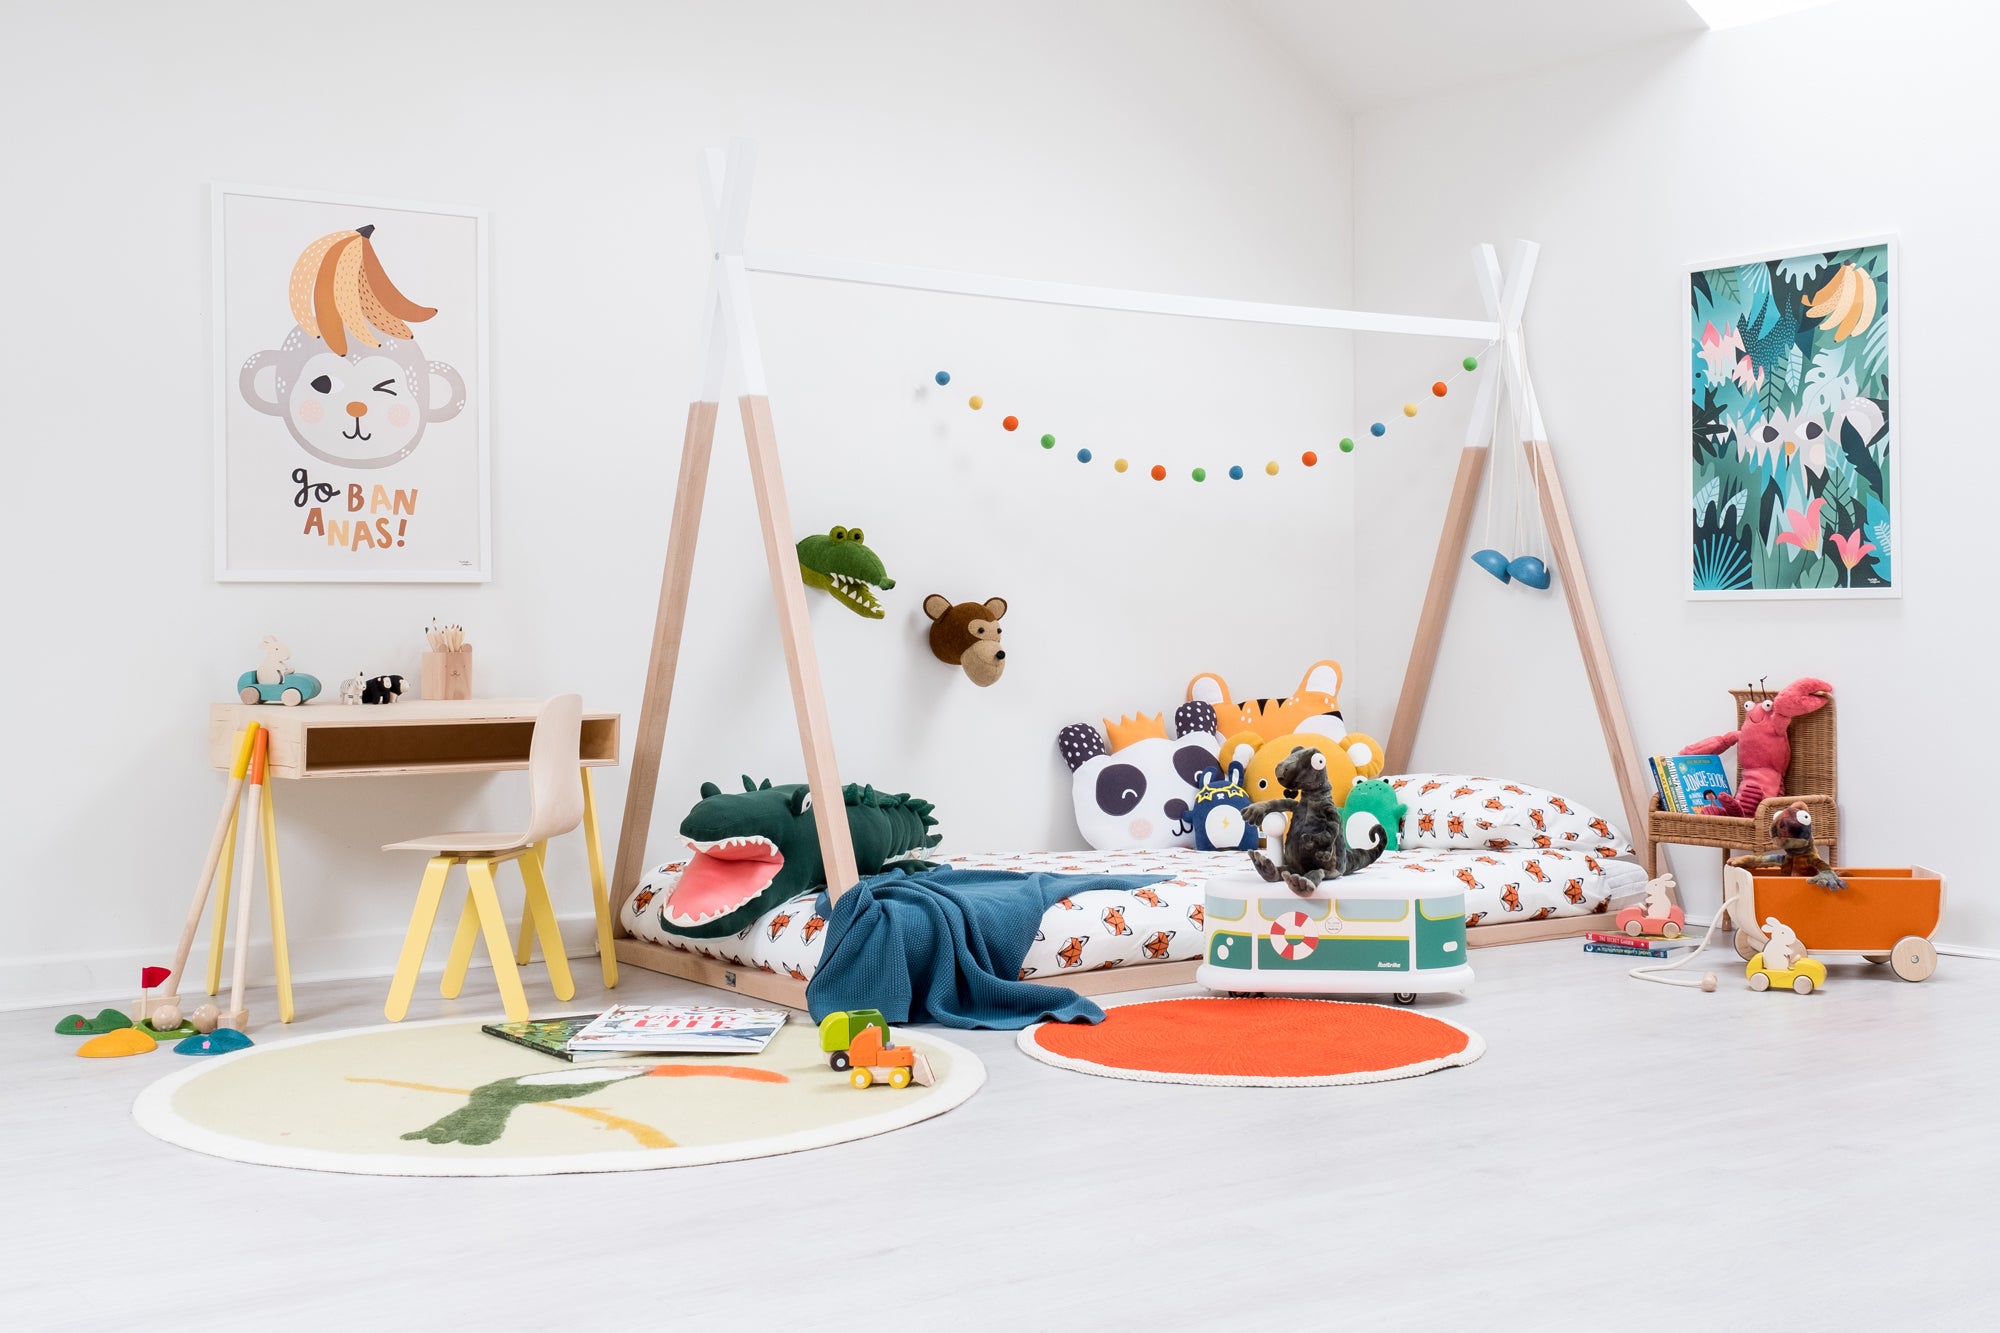 Hide and Seek Children's Bedroom, styled by Bobby Rabbit.